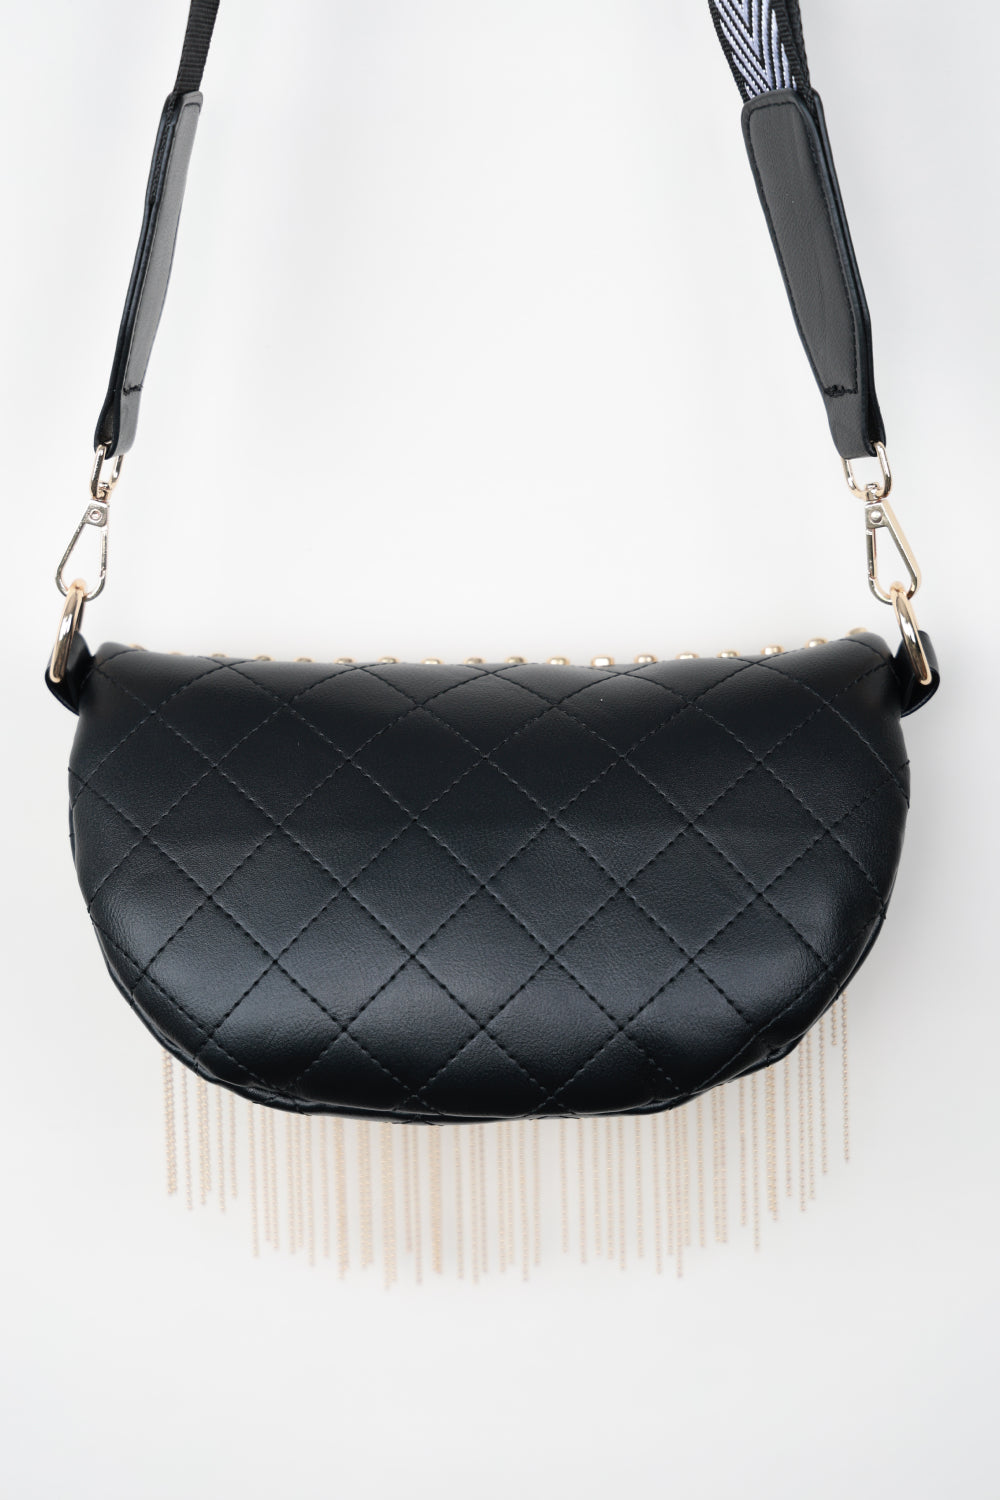 PU Leather Studded Sling Bag with Fringes - BEAUTY COSMOTICS SHOP